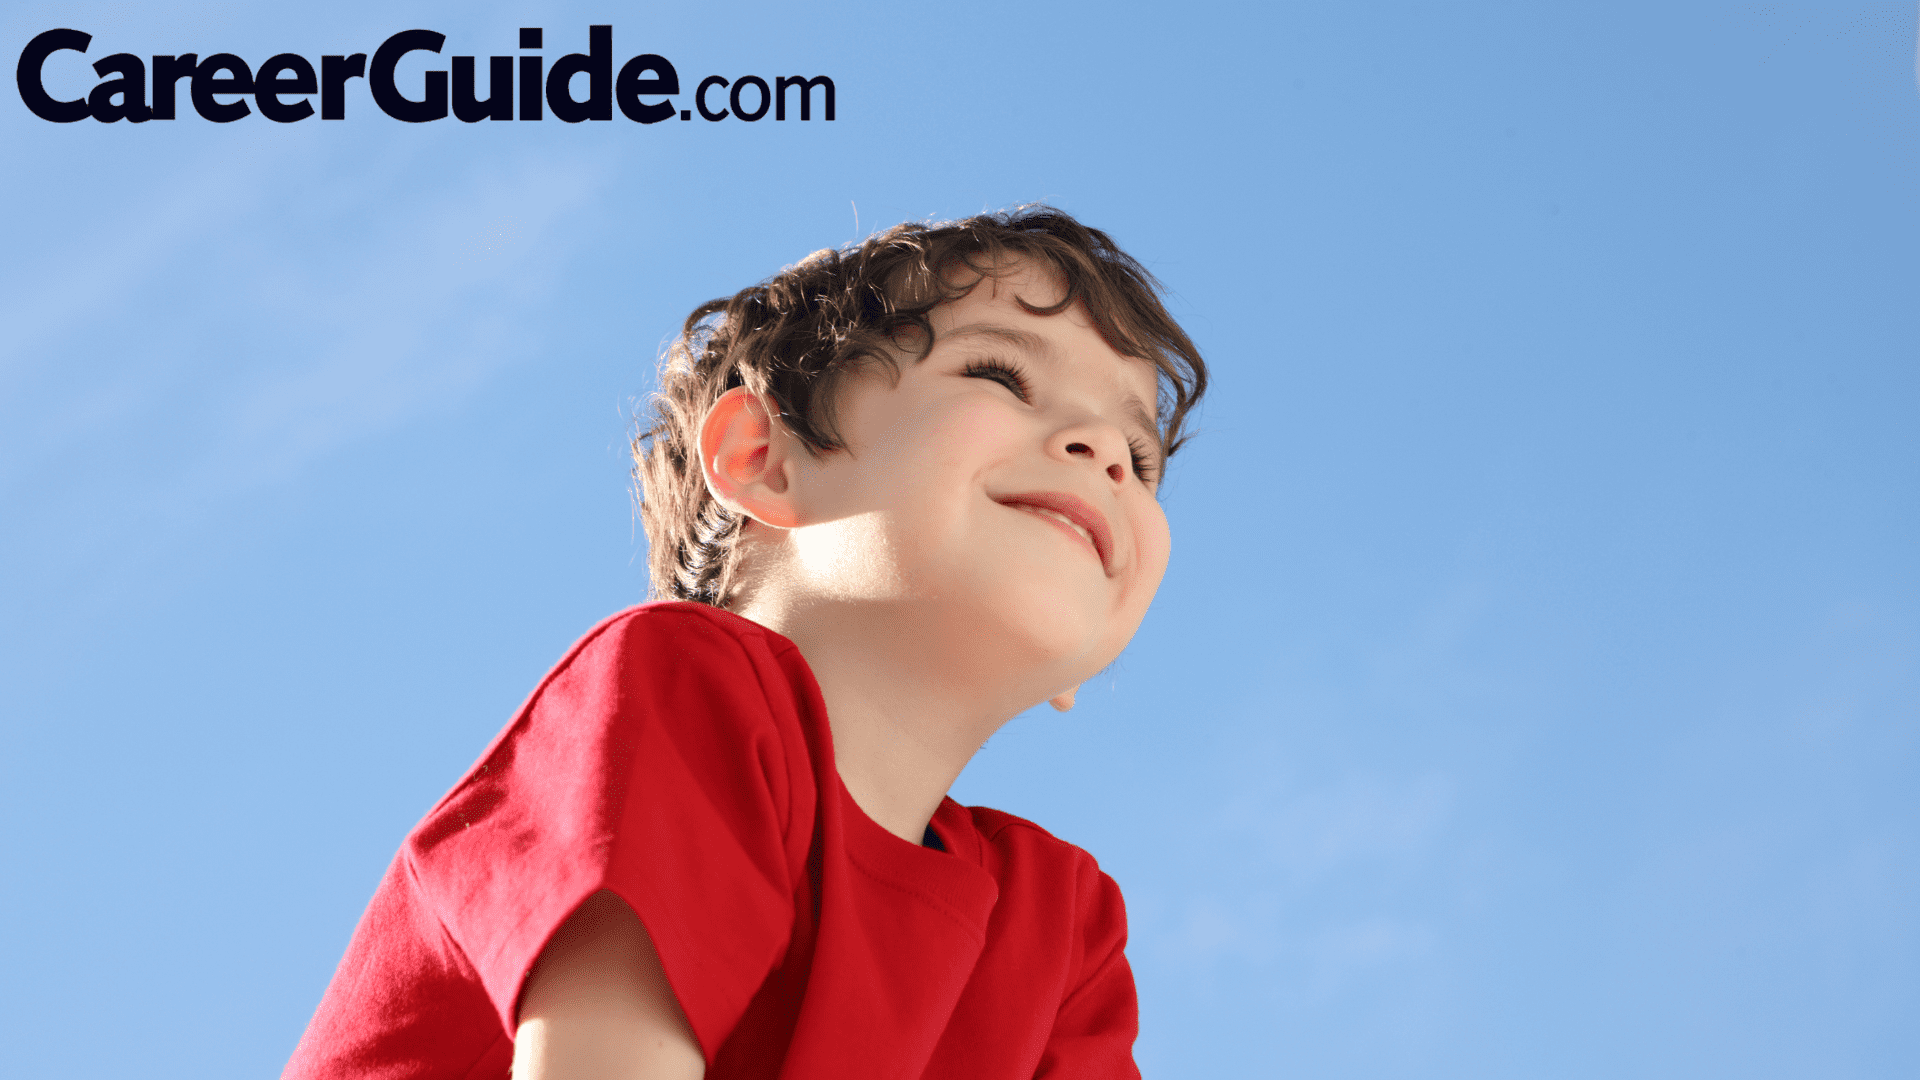 prepare your child for their future: 7 steps - careerguide